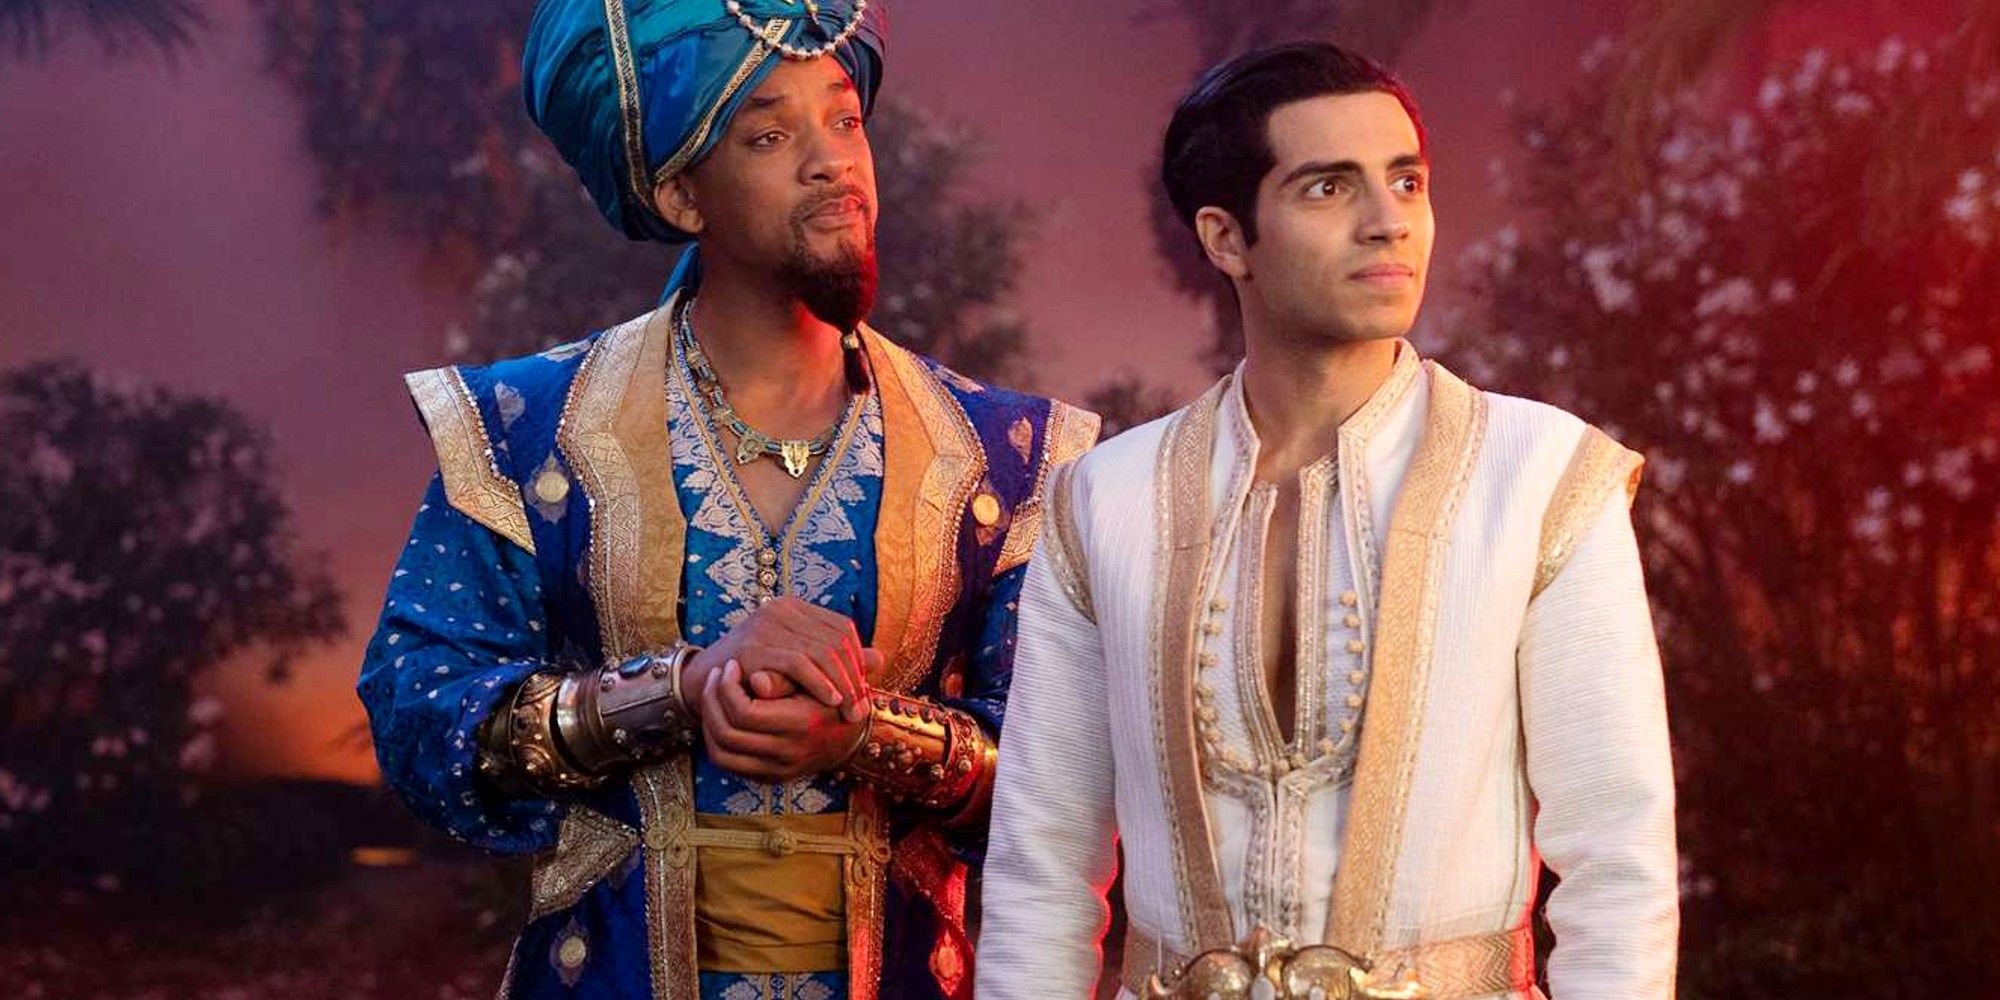 Aladdin': Everything to Know About Disney's Live-Action Remake